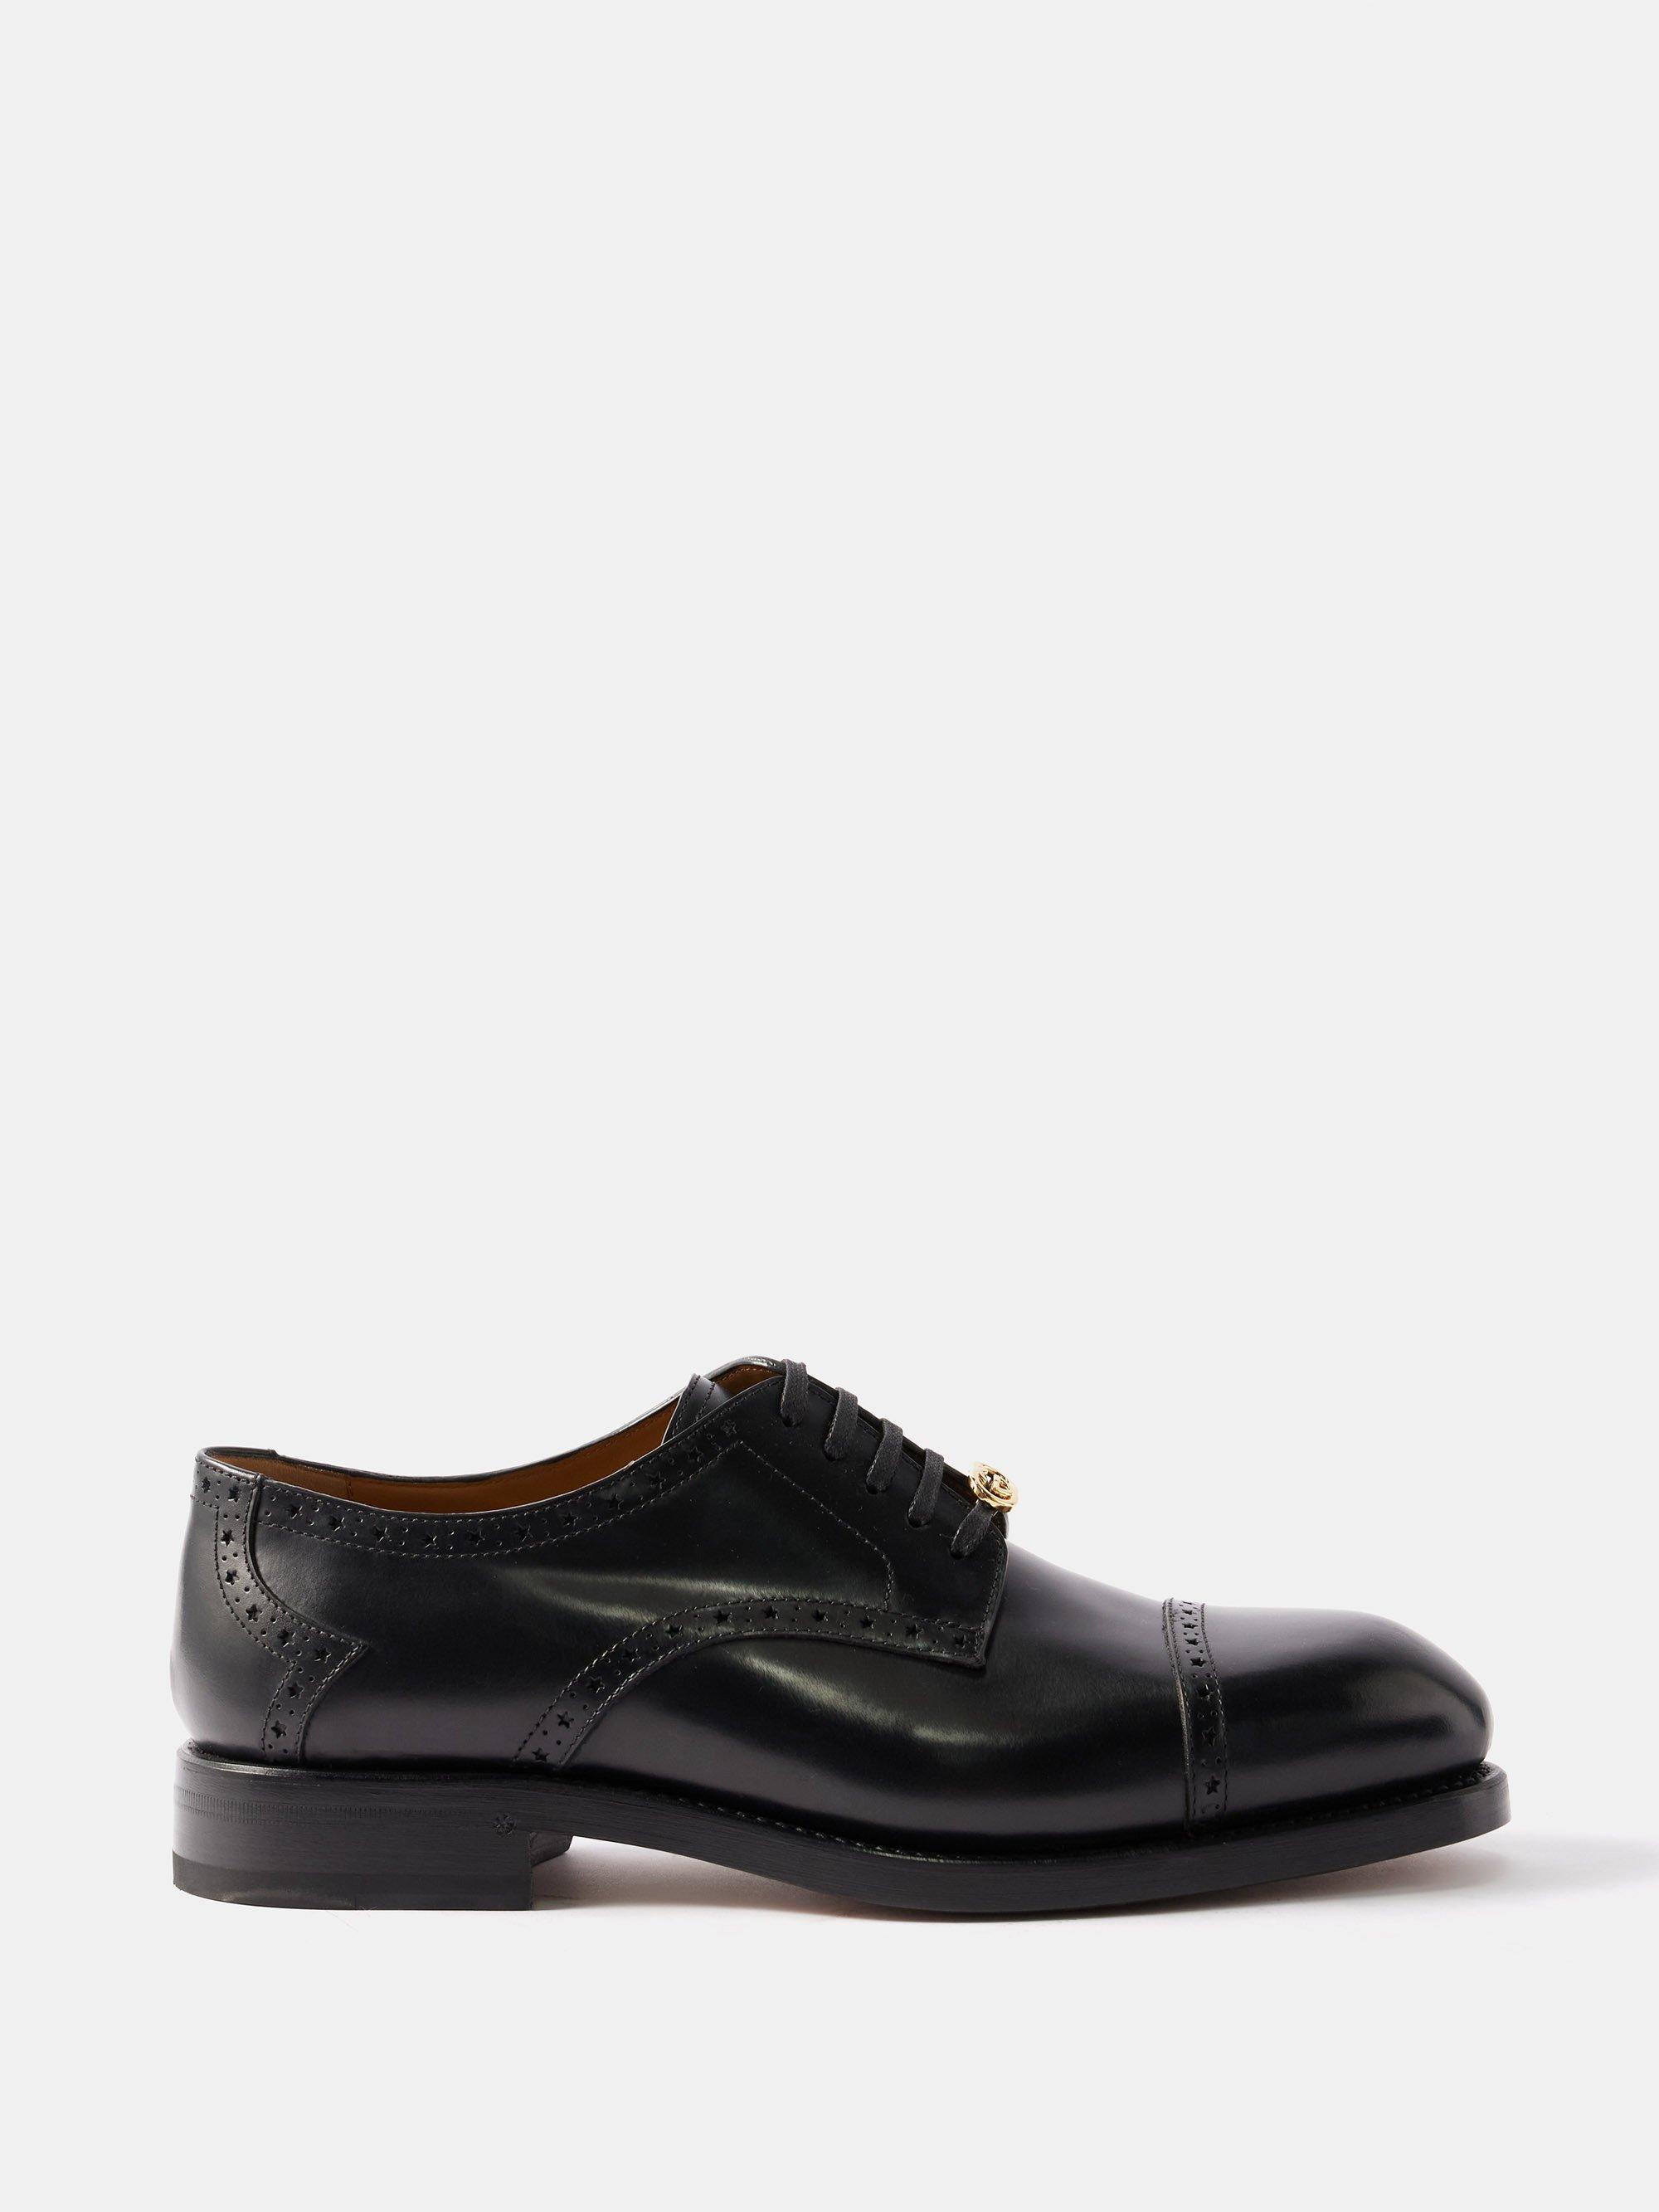 Double G Leather Derby Shoes in Black - Gucci